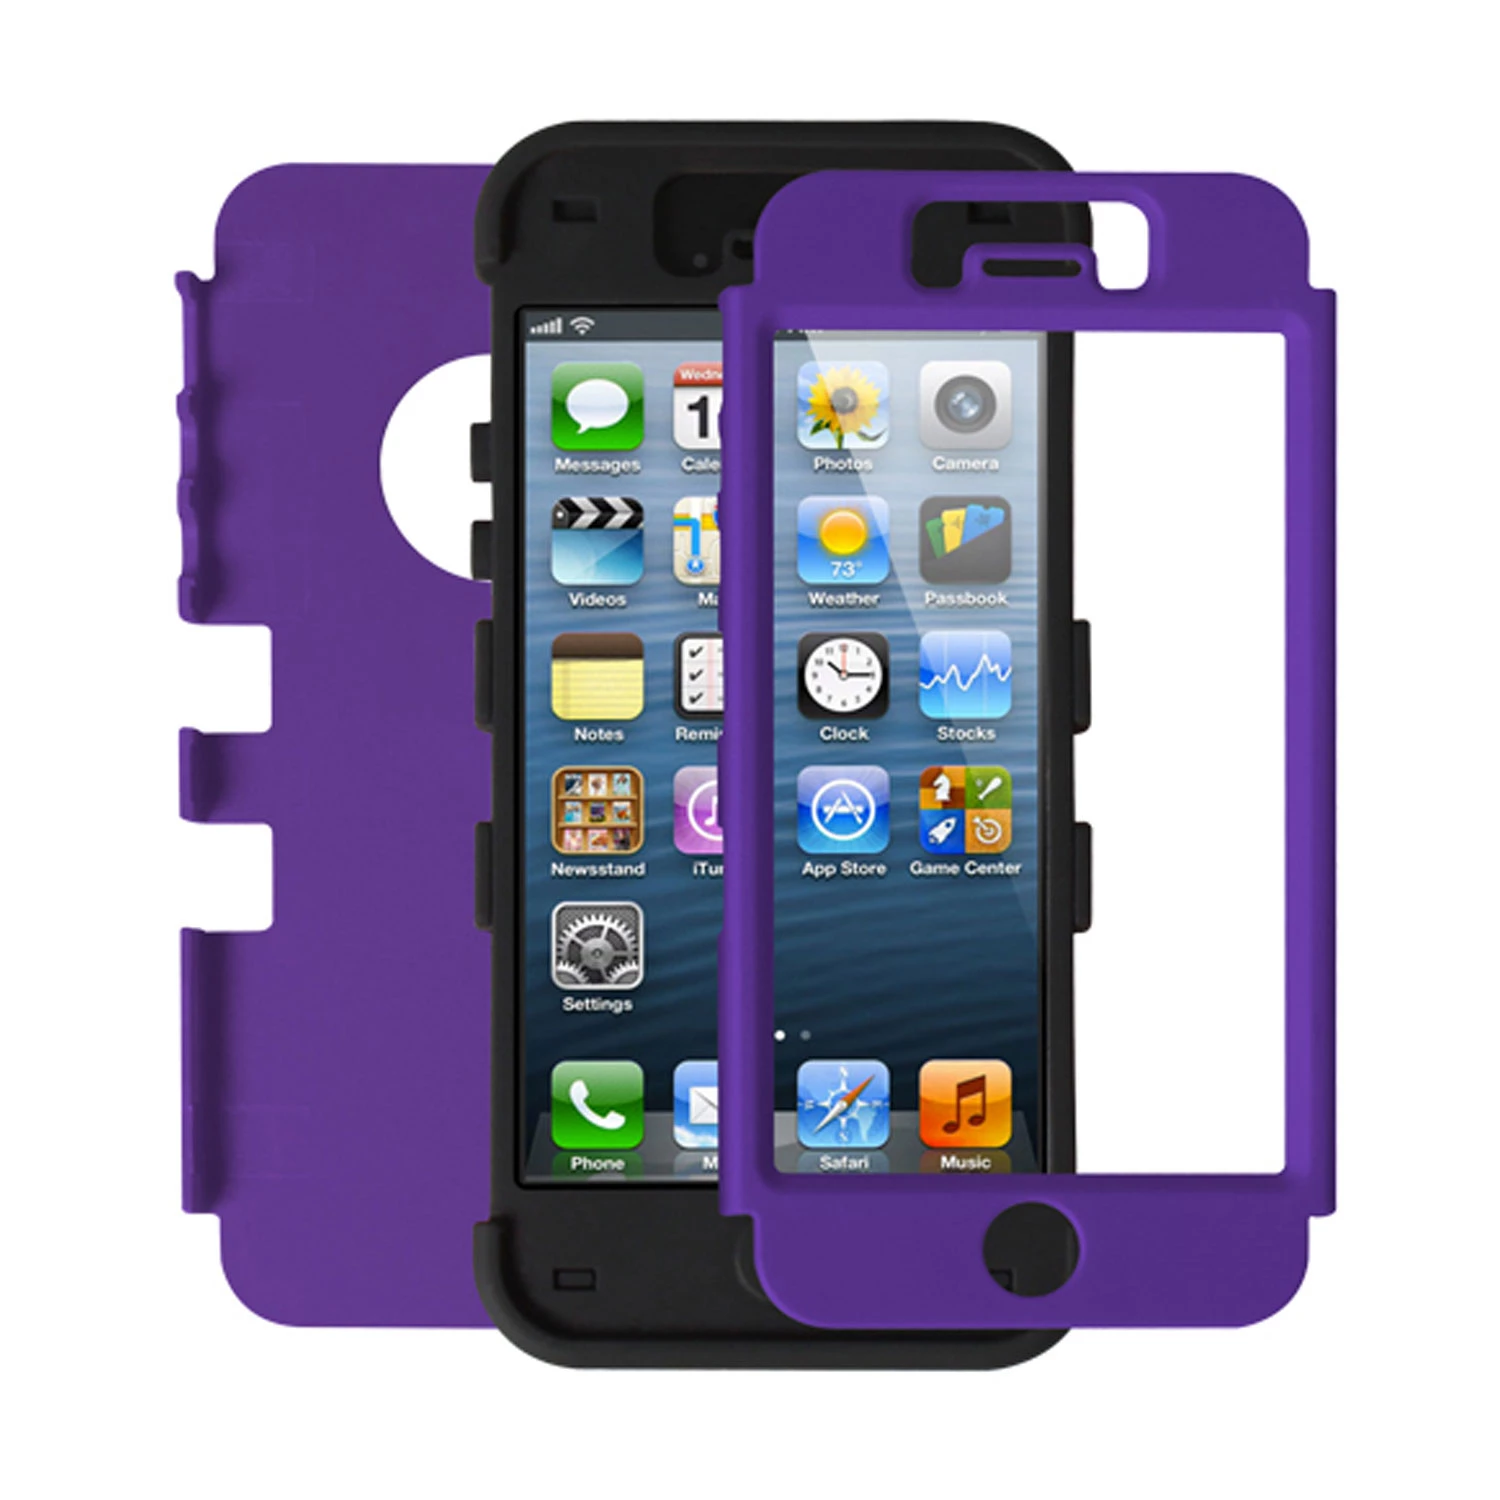 3 Layers Hybrid Armor Cover Case With Inner Soft Shell For Apple iPhone 5